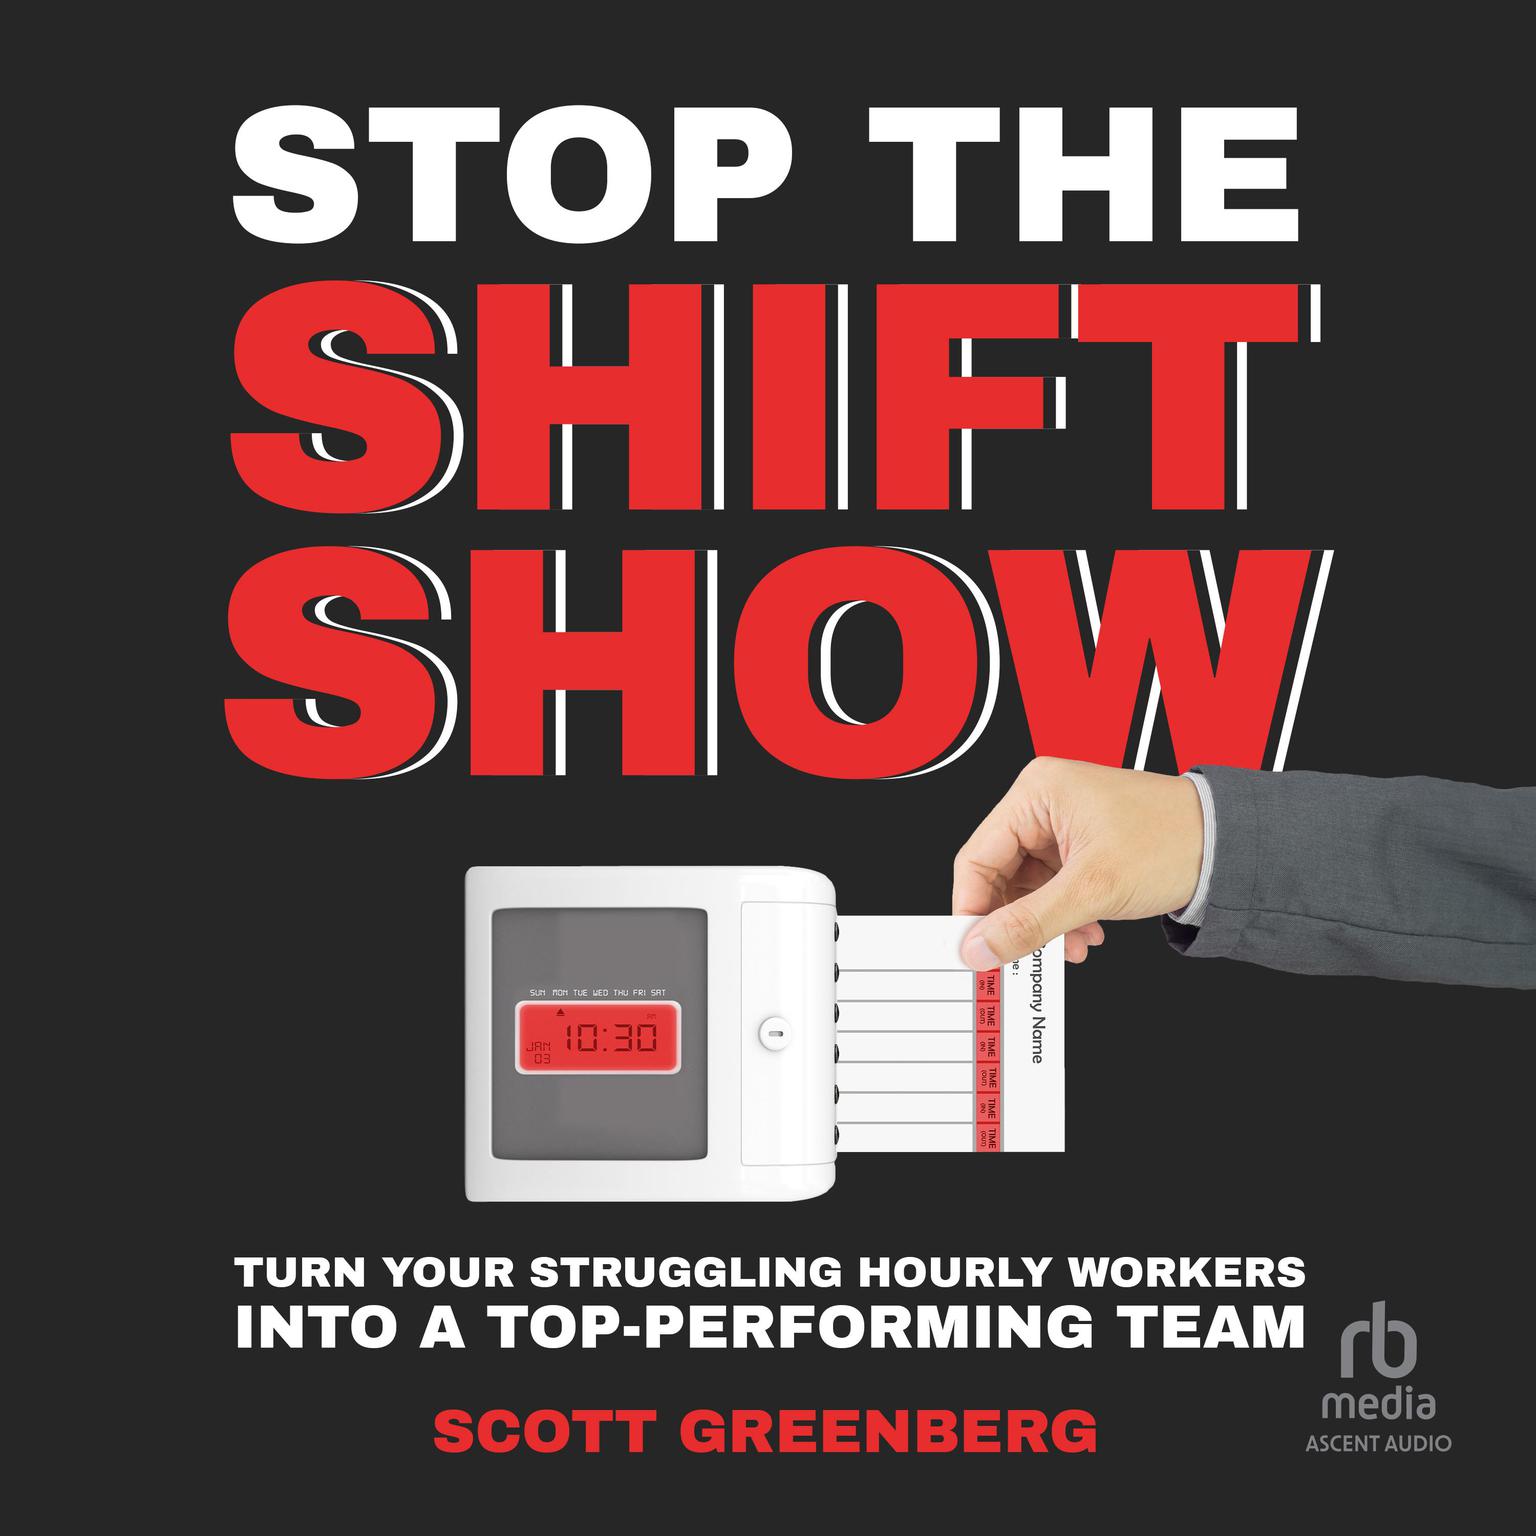 Stop the Shift Show: Turn Your Struggling Hourly Workers Into a Top-Performing Team Audiobook, by Scott Greenberg